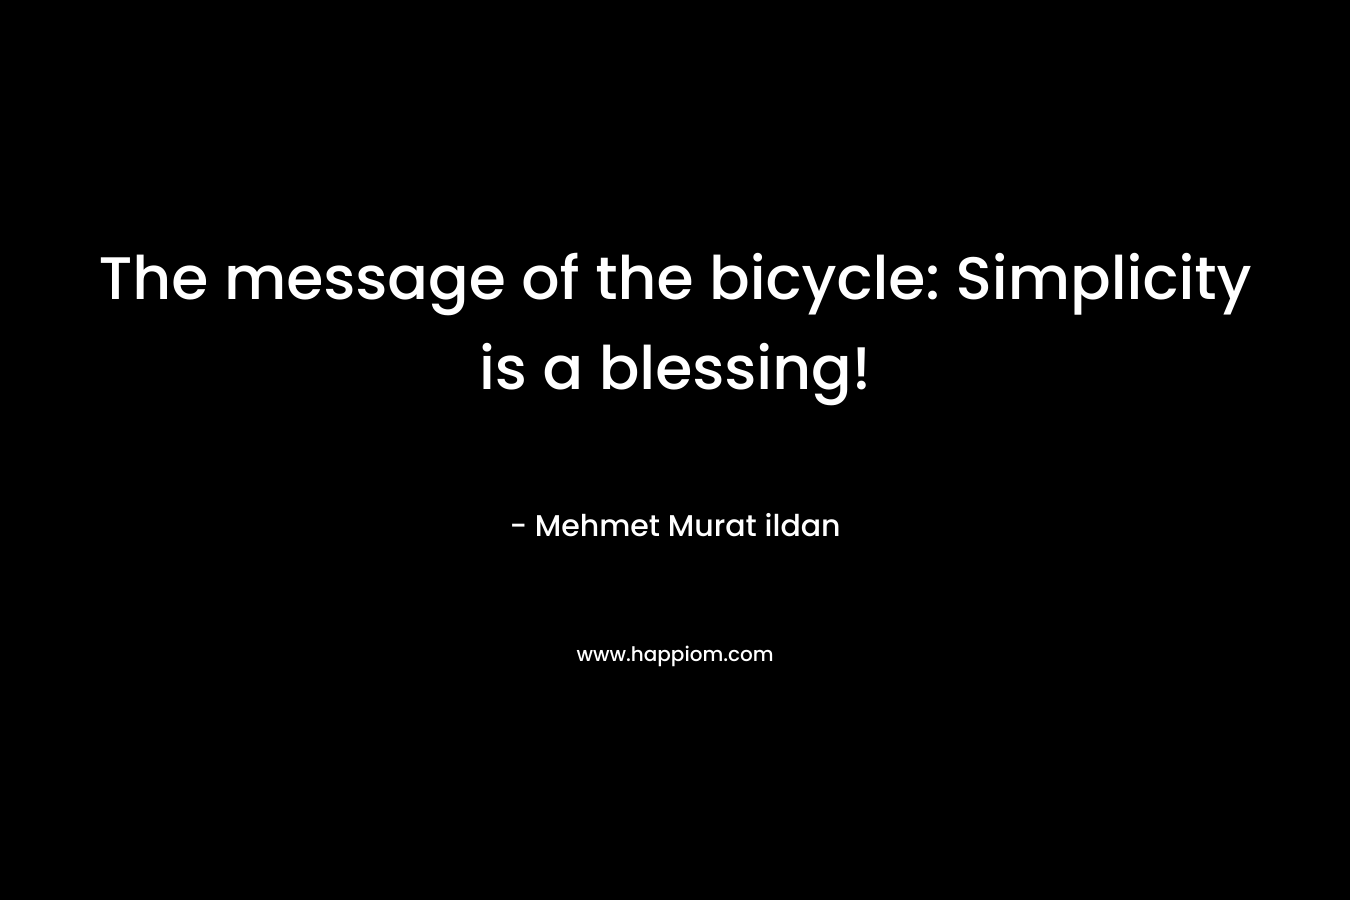 The message of the bicycle: Simplicity is a blessing!